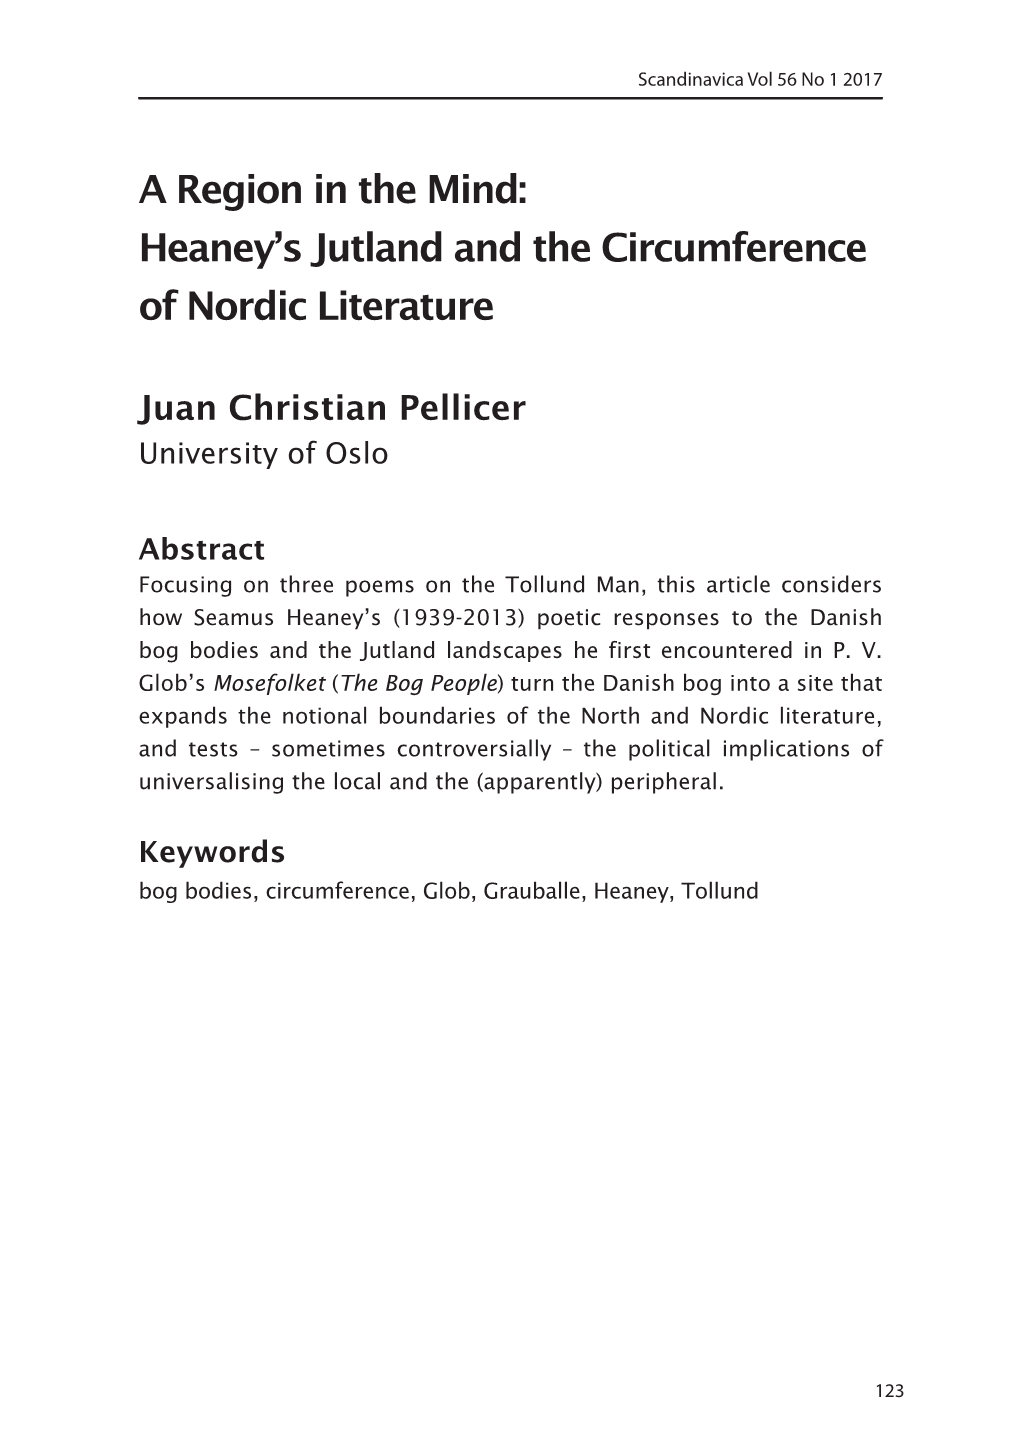 Heaney's Jutland and the Circumference of Nordic Literature